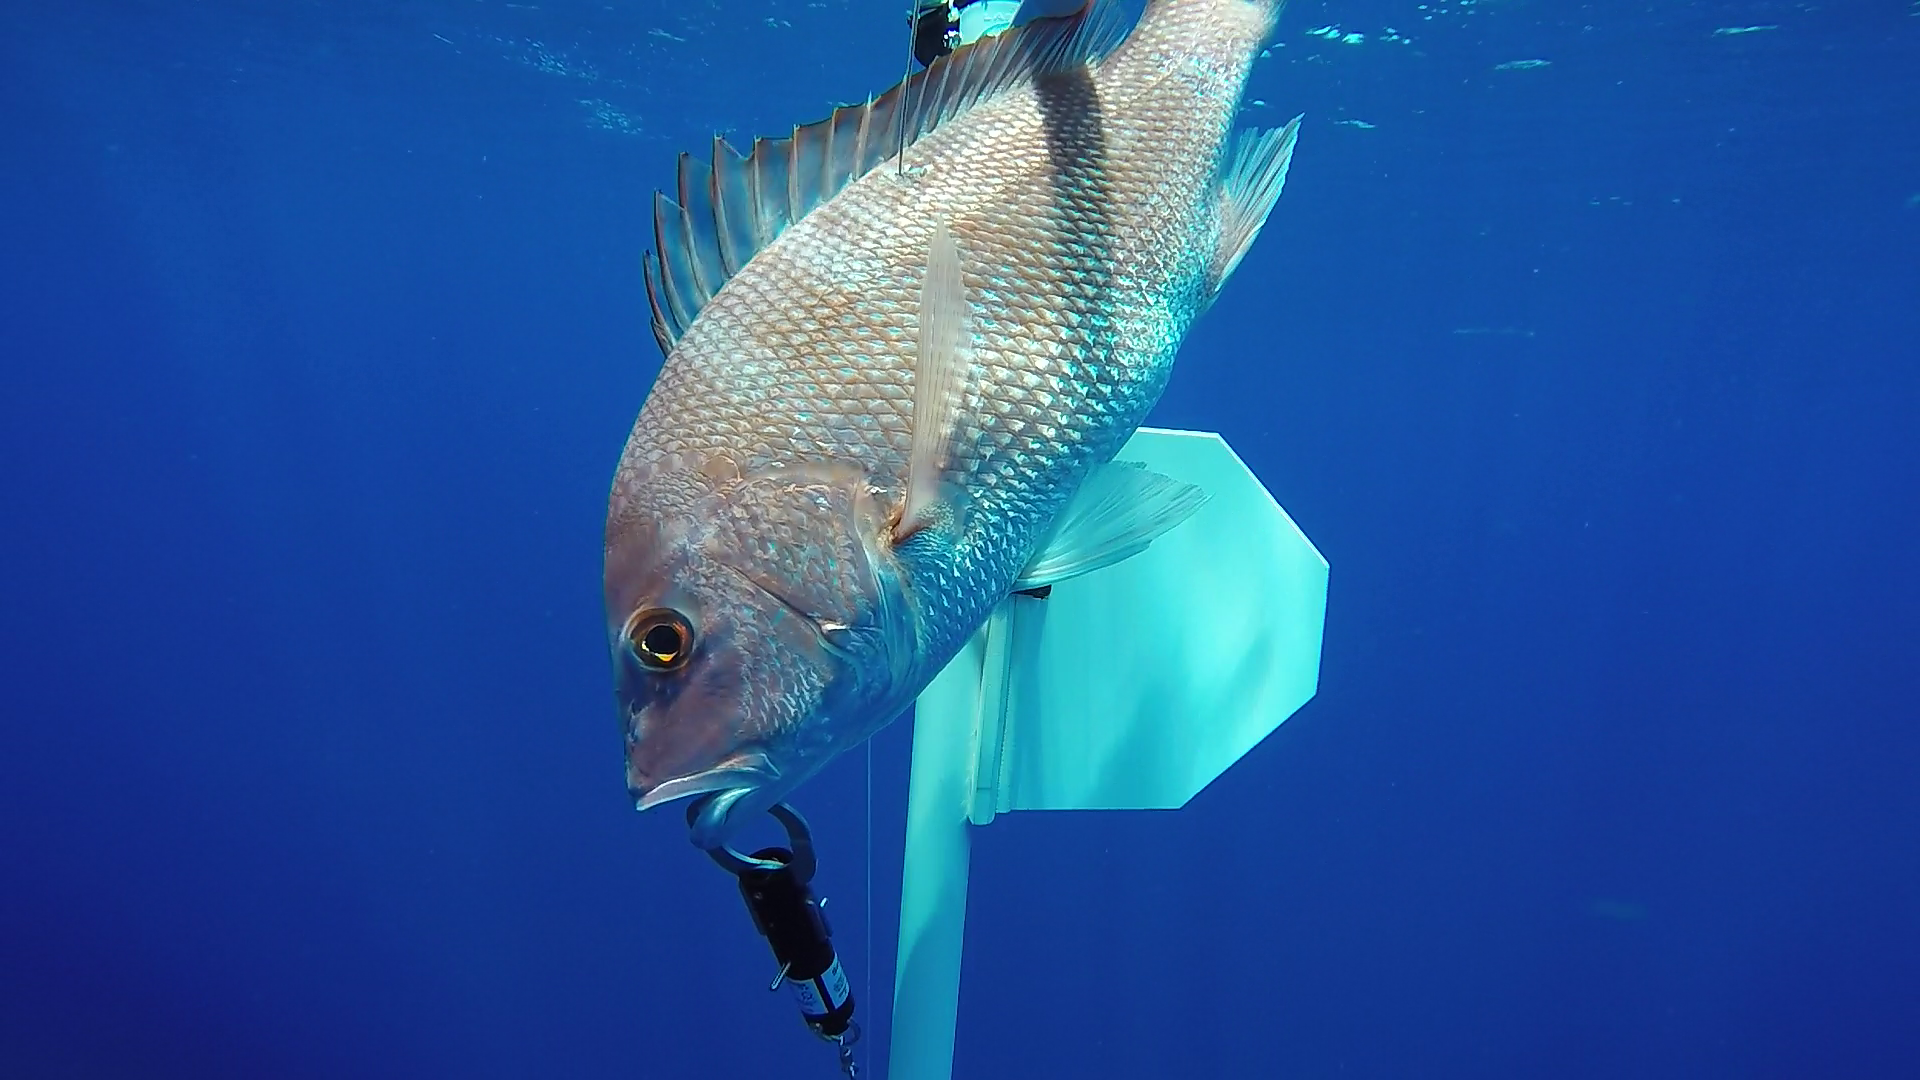 Will Anglers Use Descending Devices on Reef Fish? - Hook, Line and